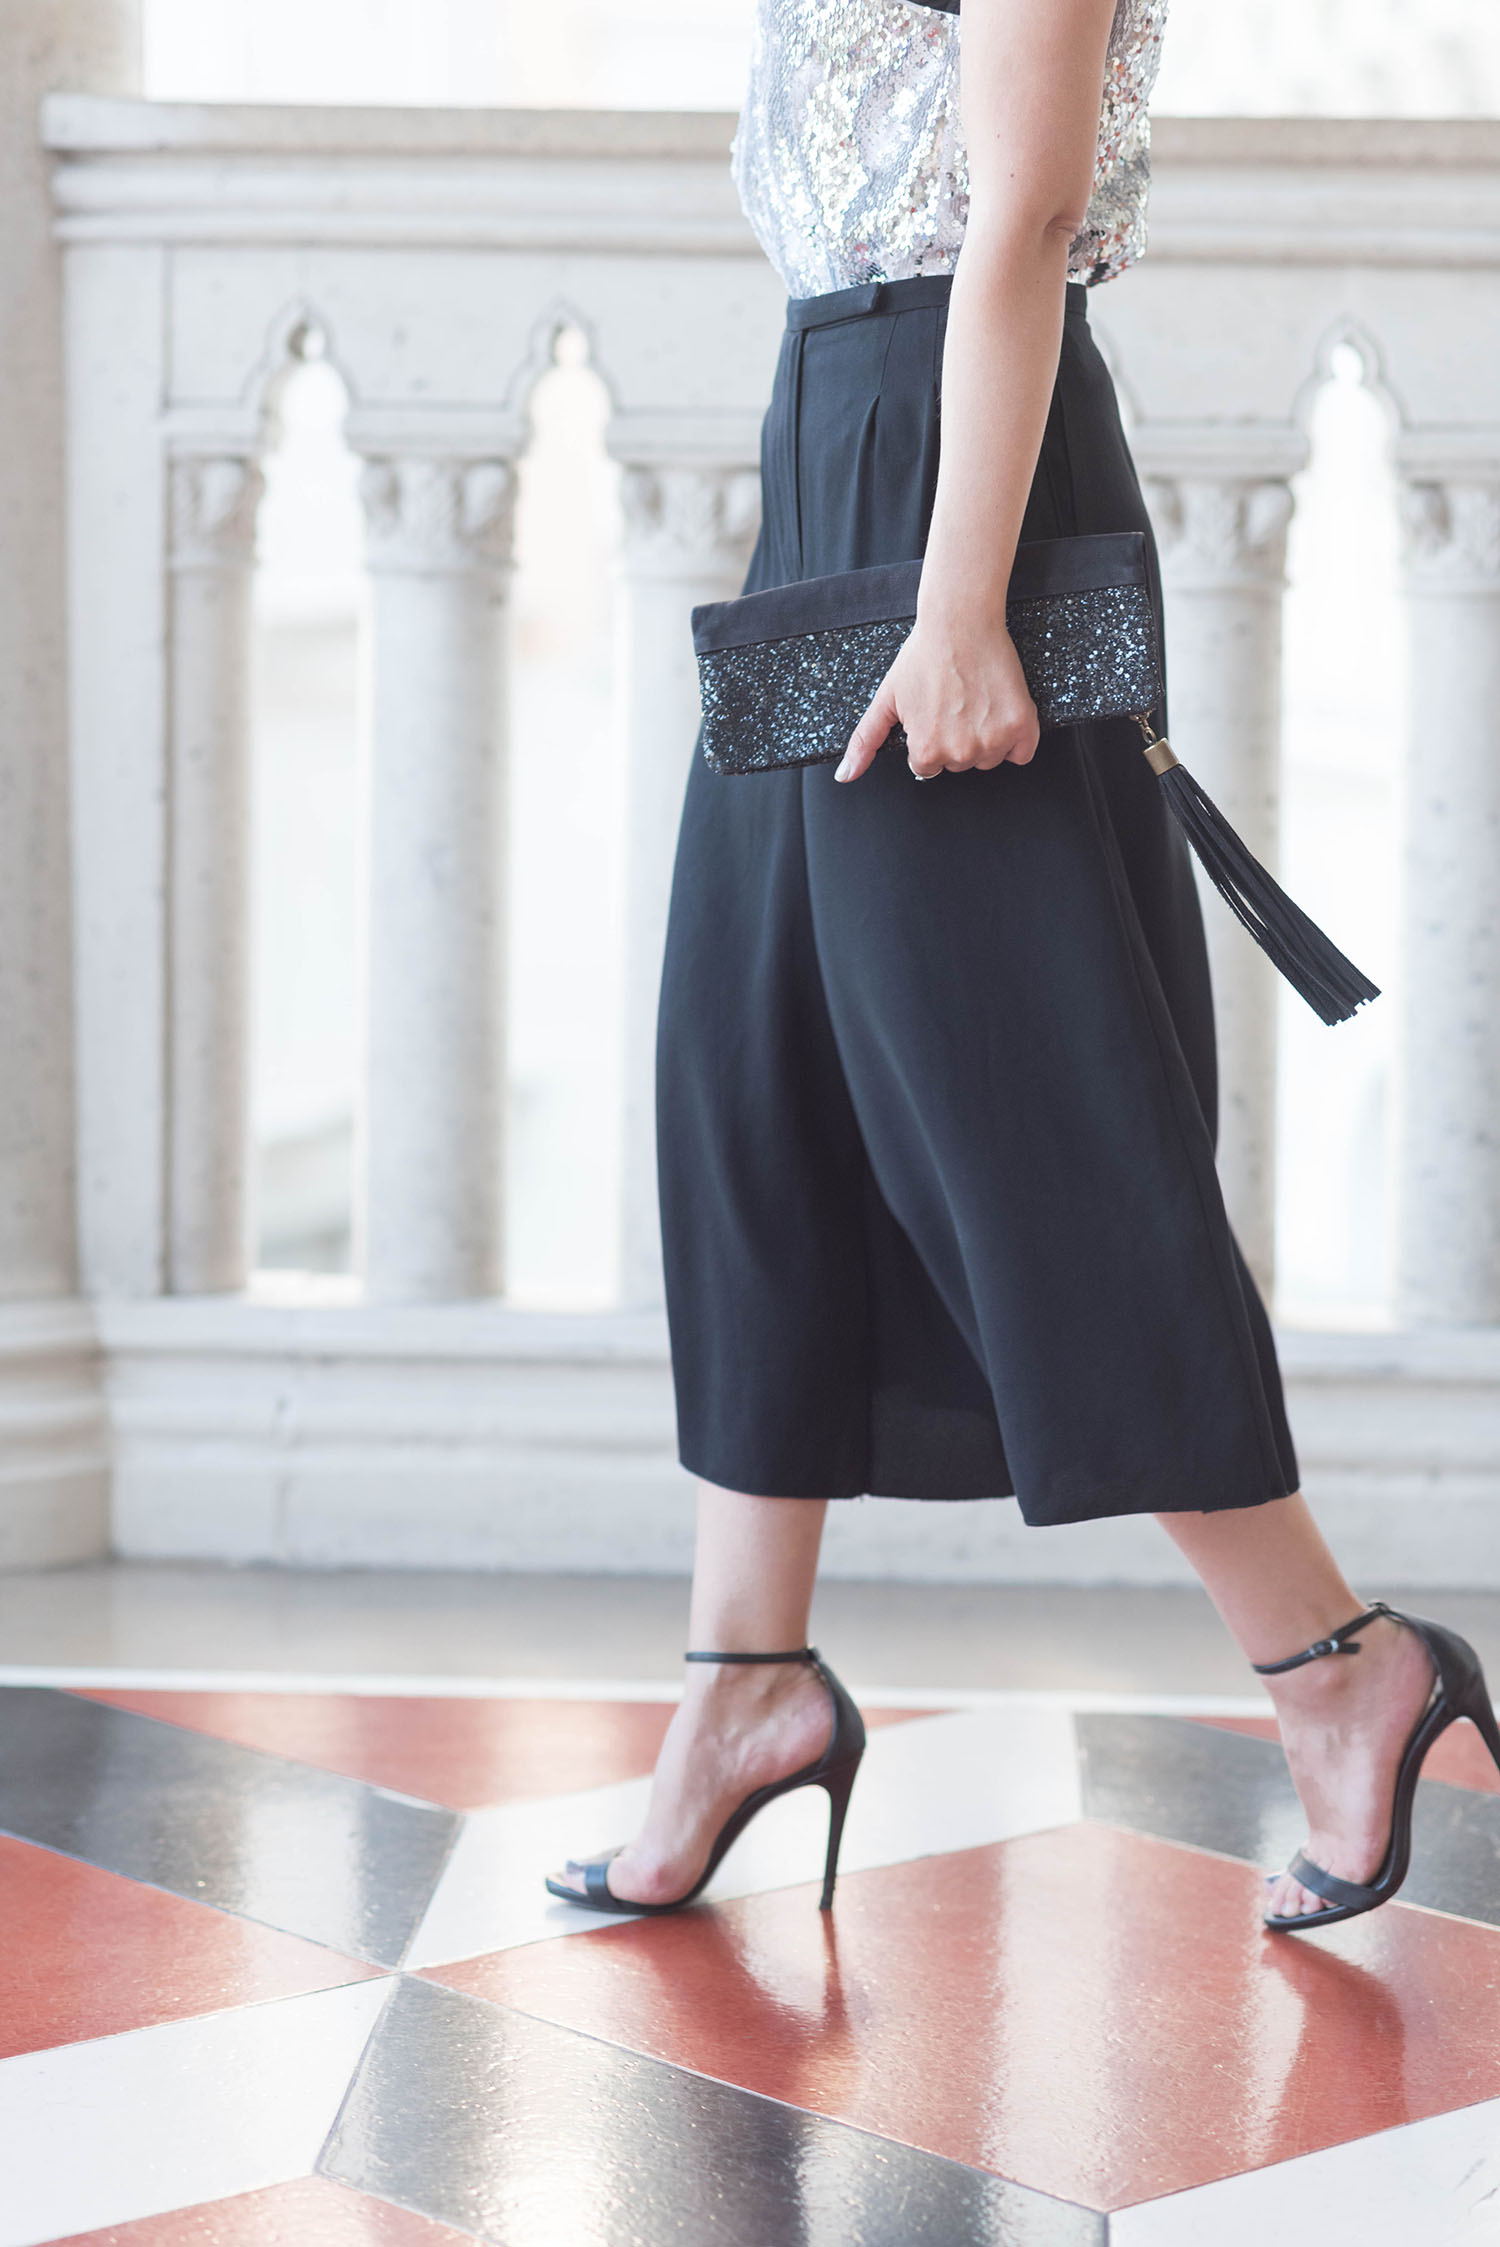 Outfit details on fashion blogger Cee Fardoe of Coco & Vera, wearing Aritzia culottes and carrying Sezane clutch